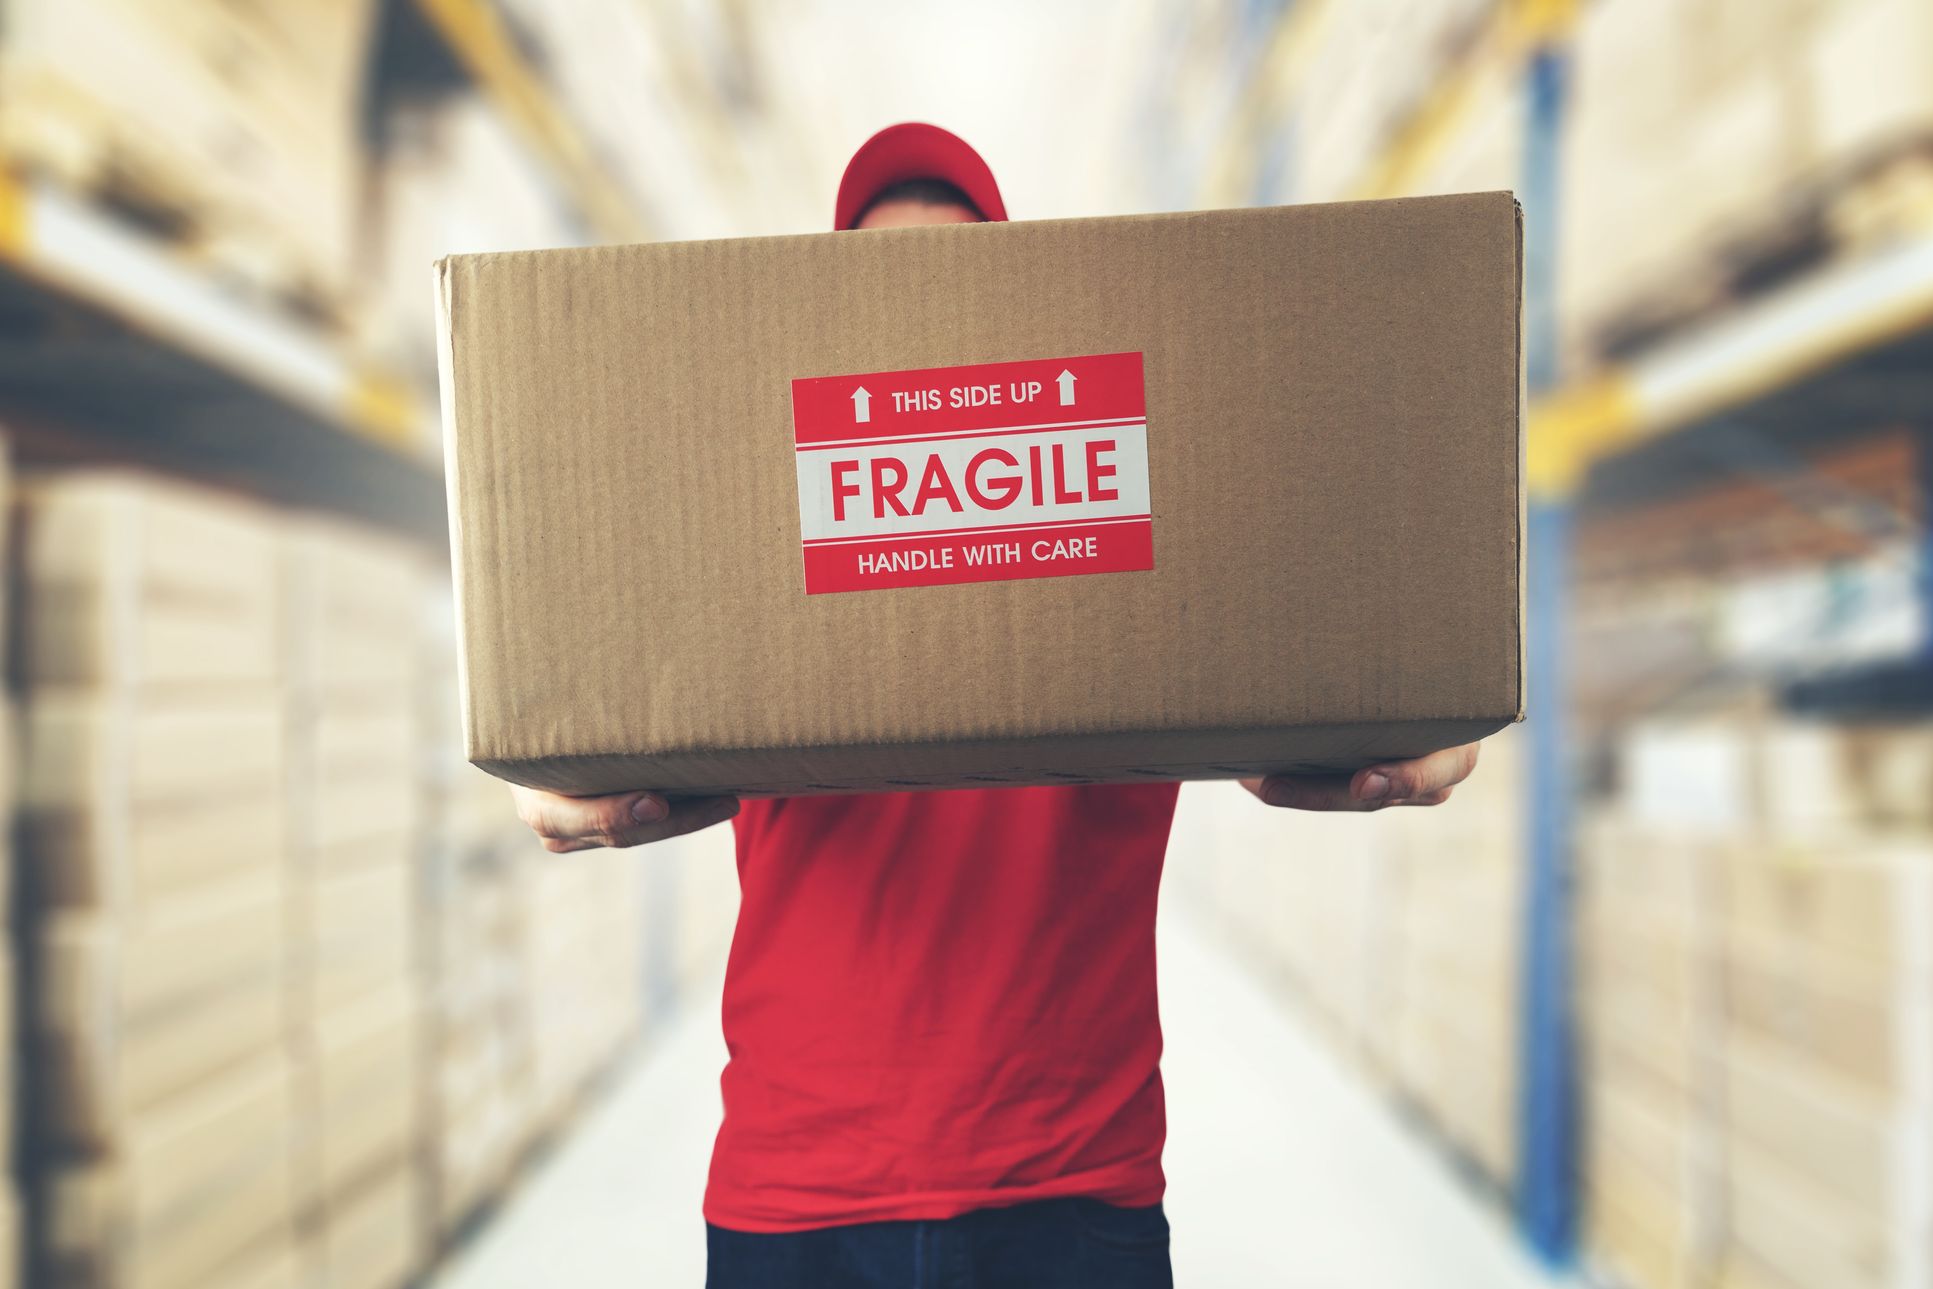 Guy holding a box labeled as fragile